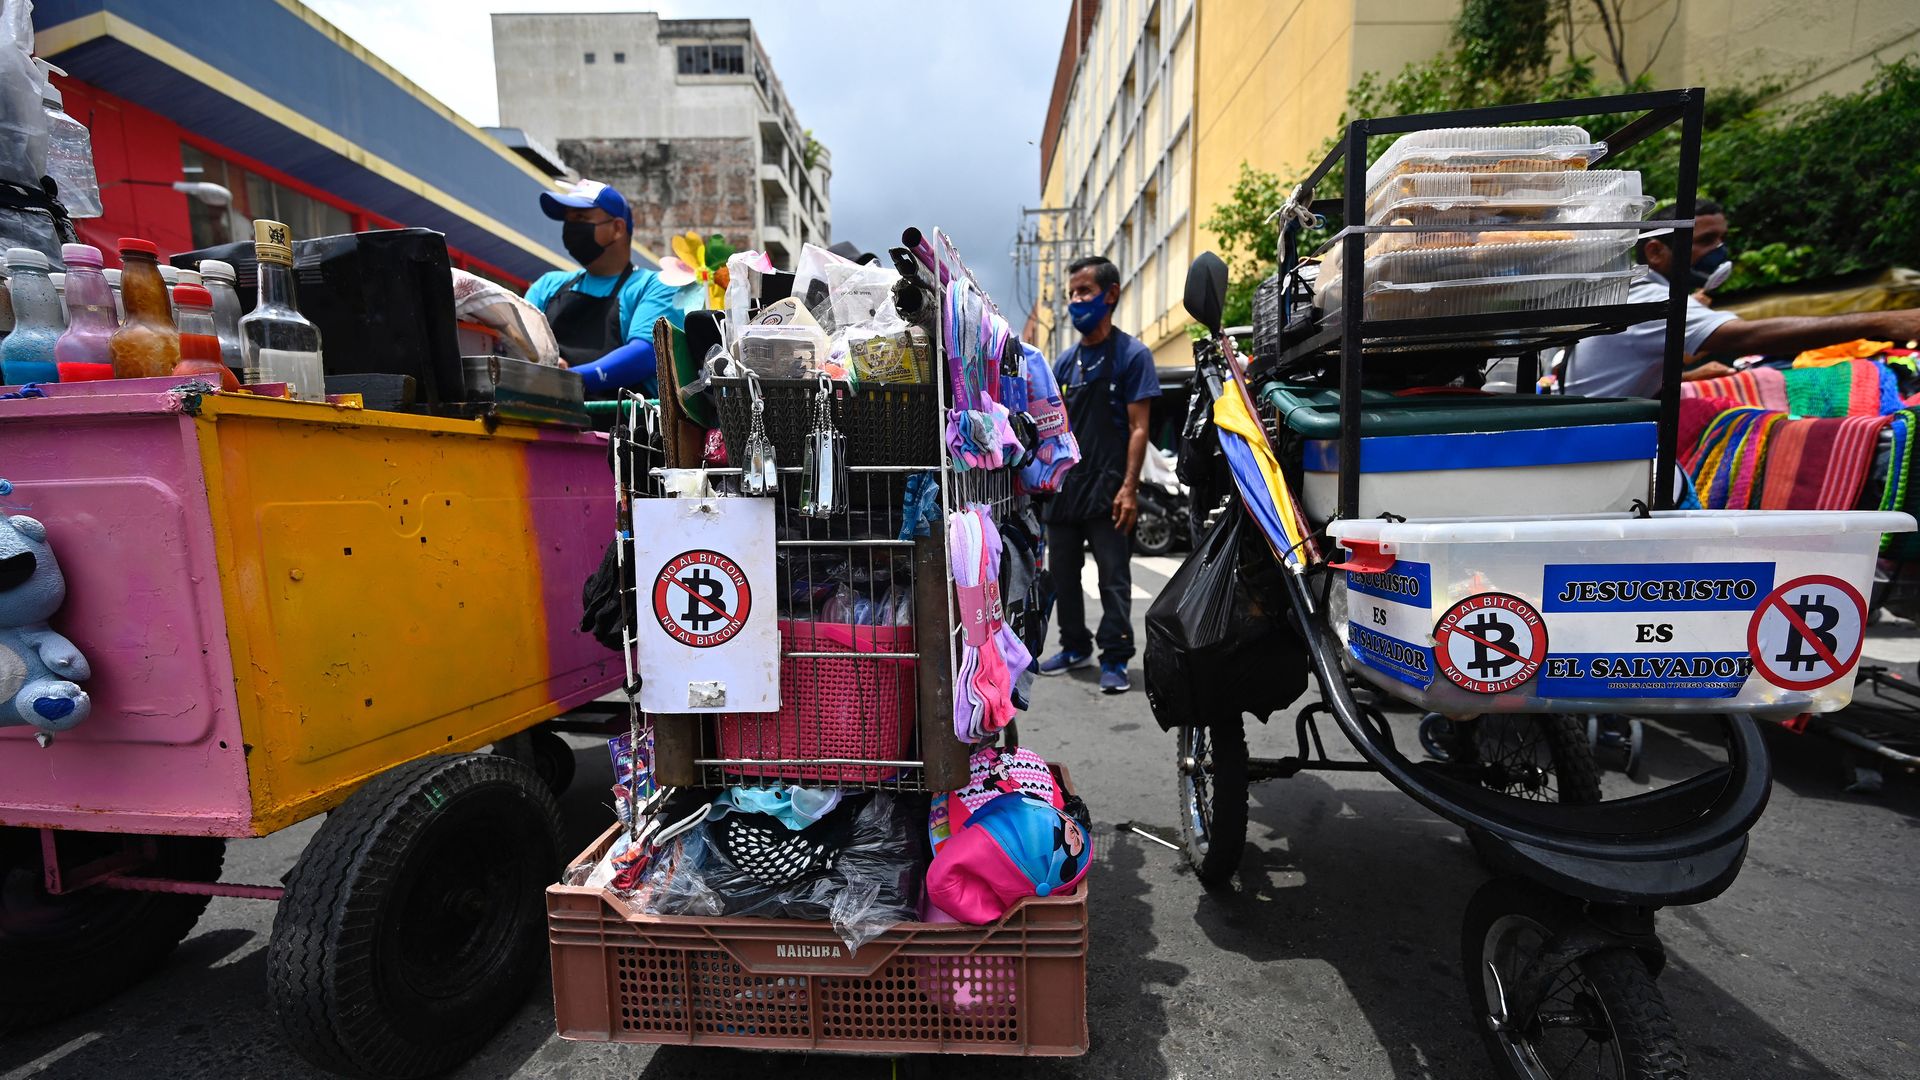 Street vendors in San Salvador have put stickers in their carts that say “No to Bitcoin.”